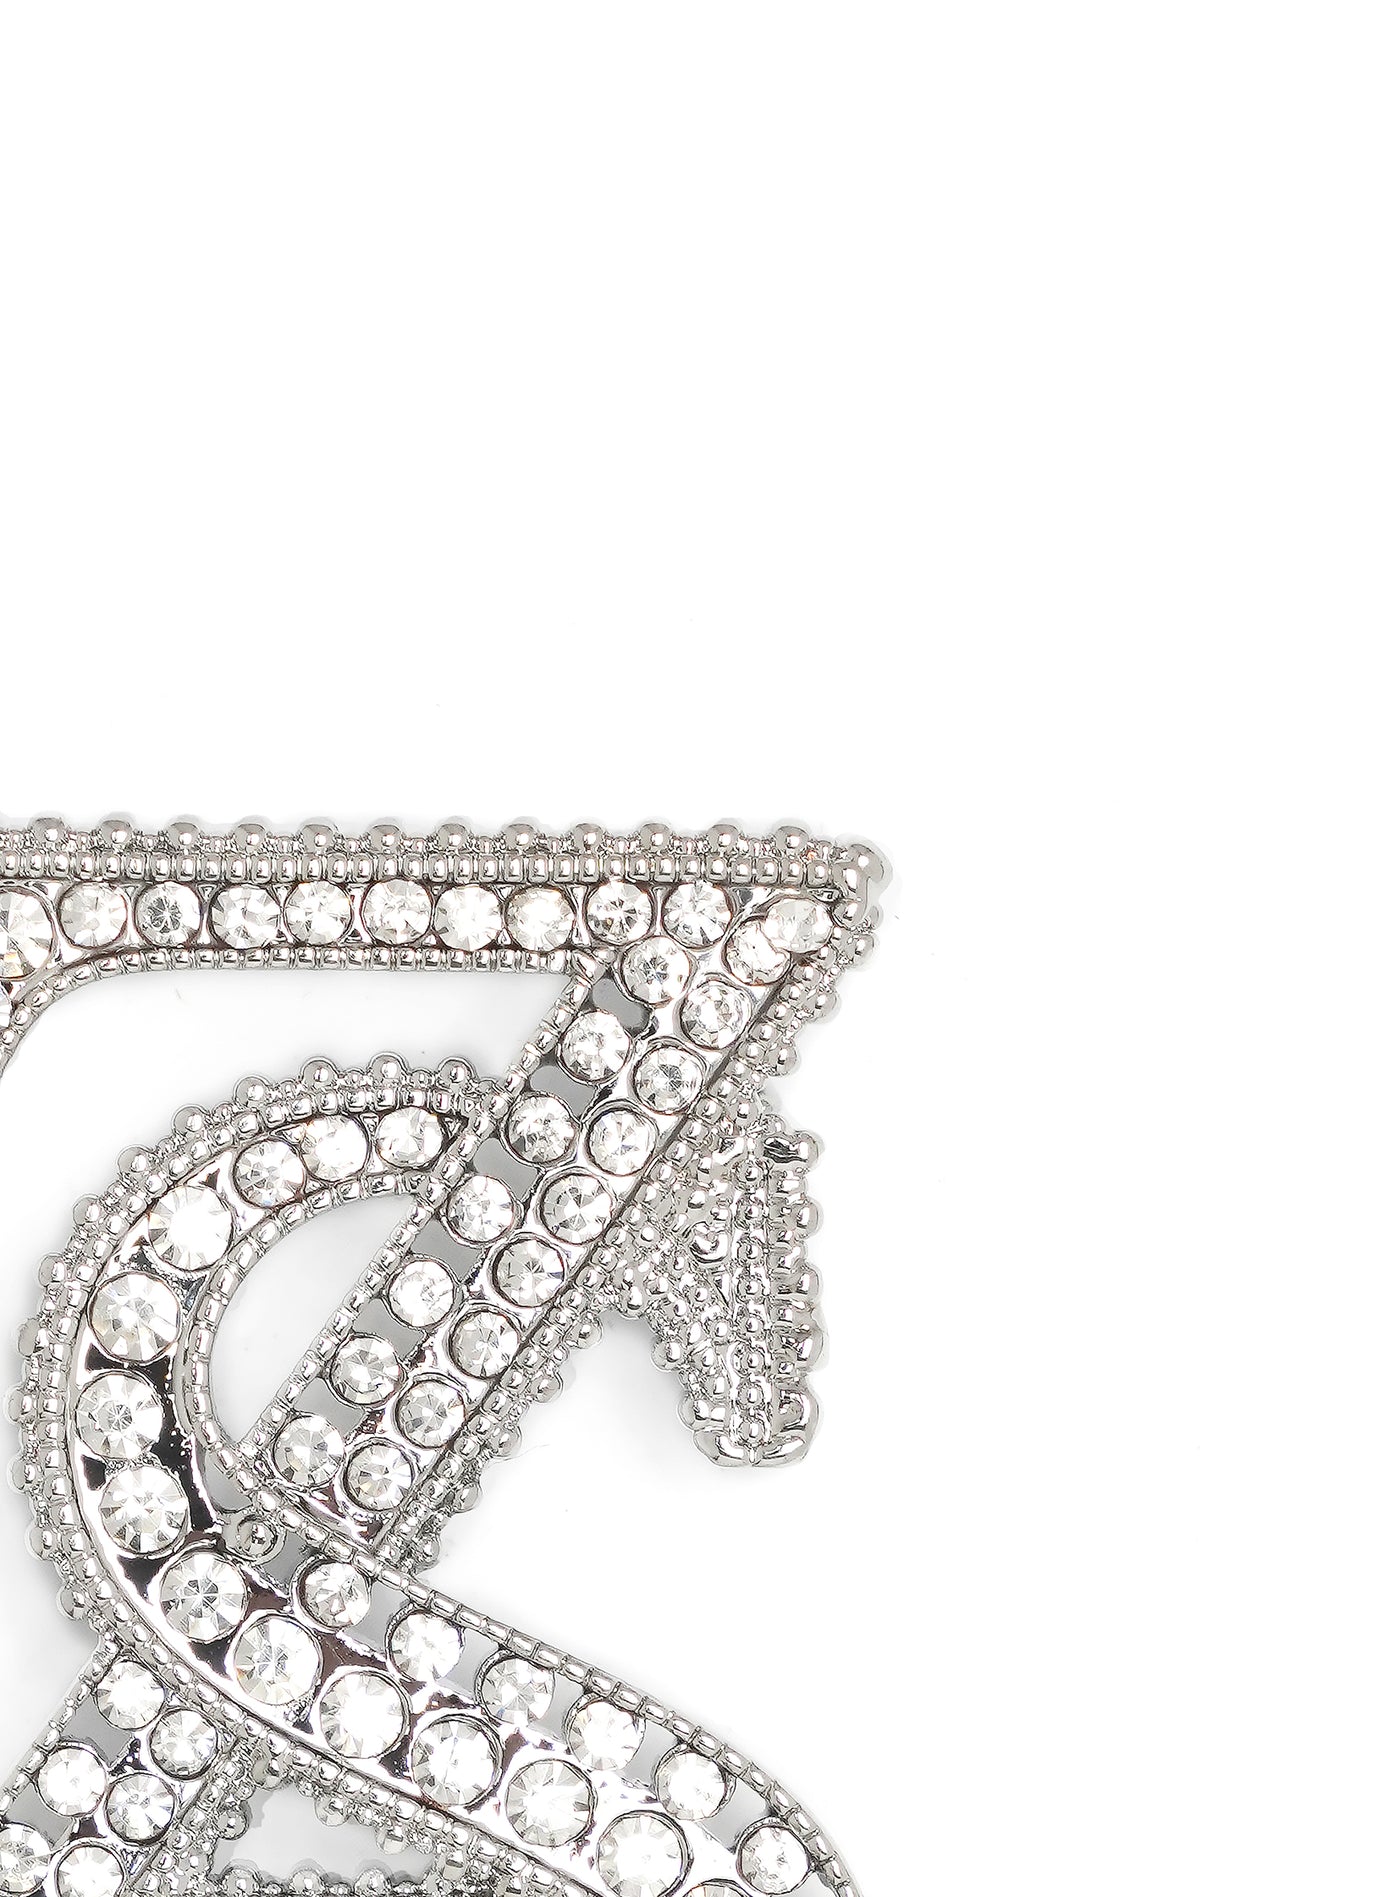 ZS Infinity Brooch - Crystal White Gold